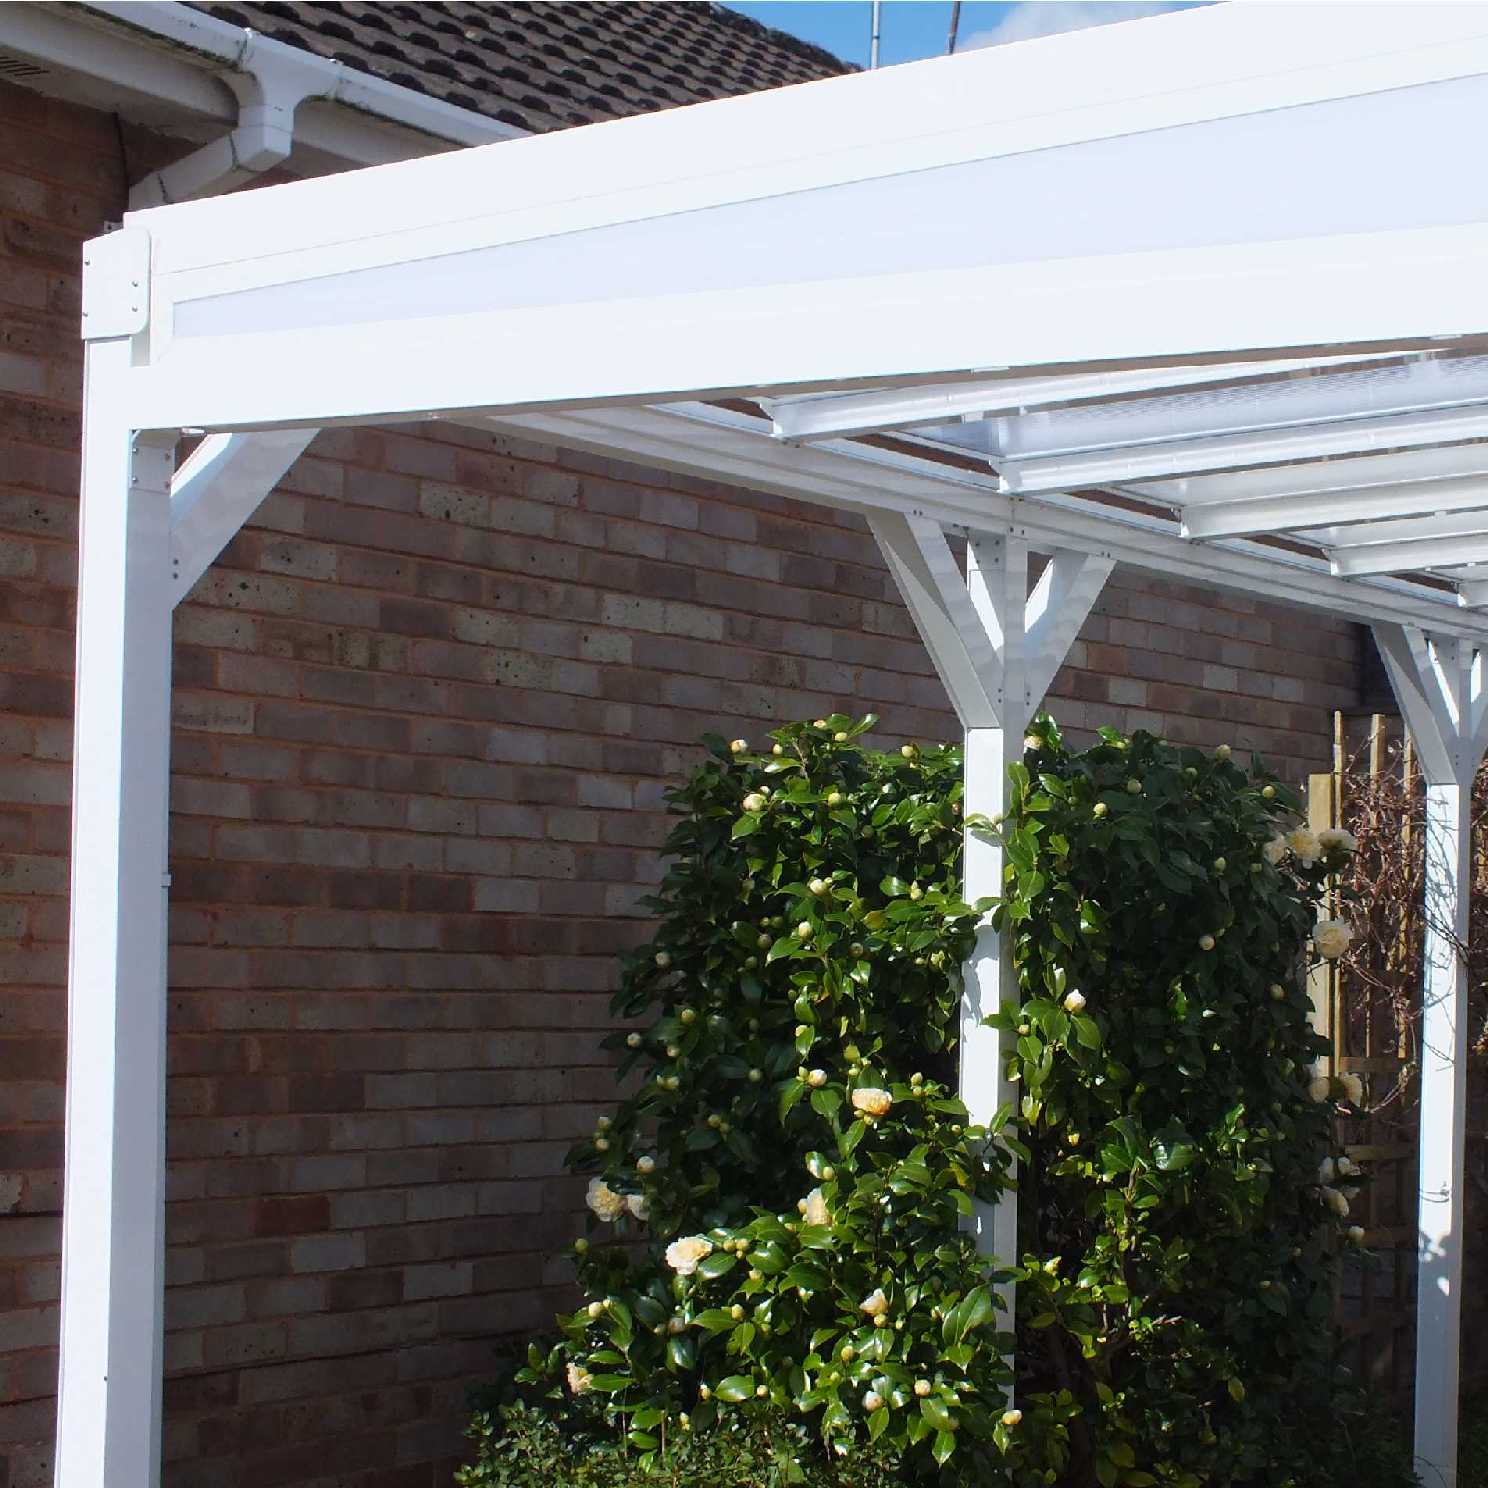 Omega Smart Lean-To Canopy, White with 16mm Polycarbonate Glazing - 7.0m (W) x 3.5m (P), (4) Supporting Posts from Omega Build